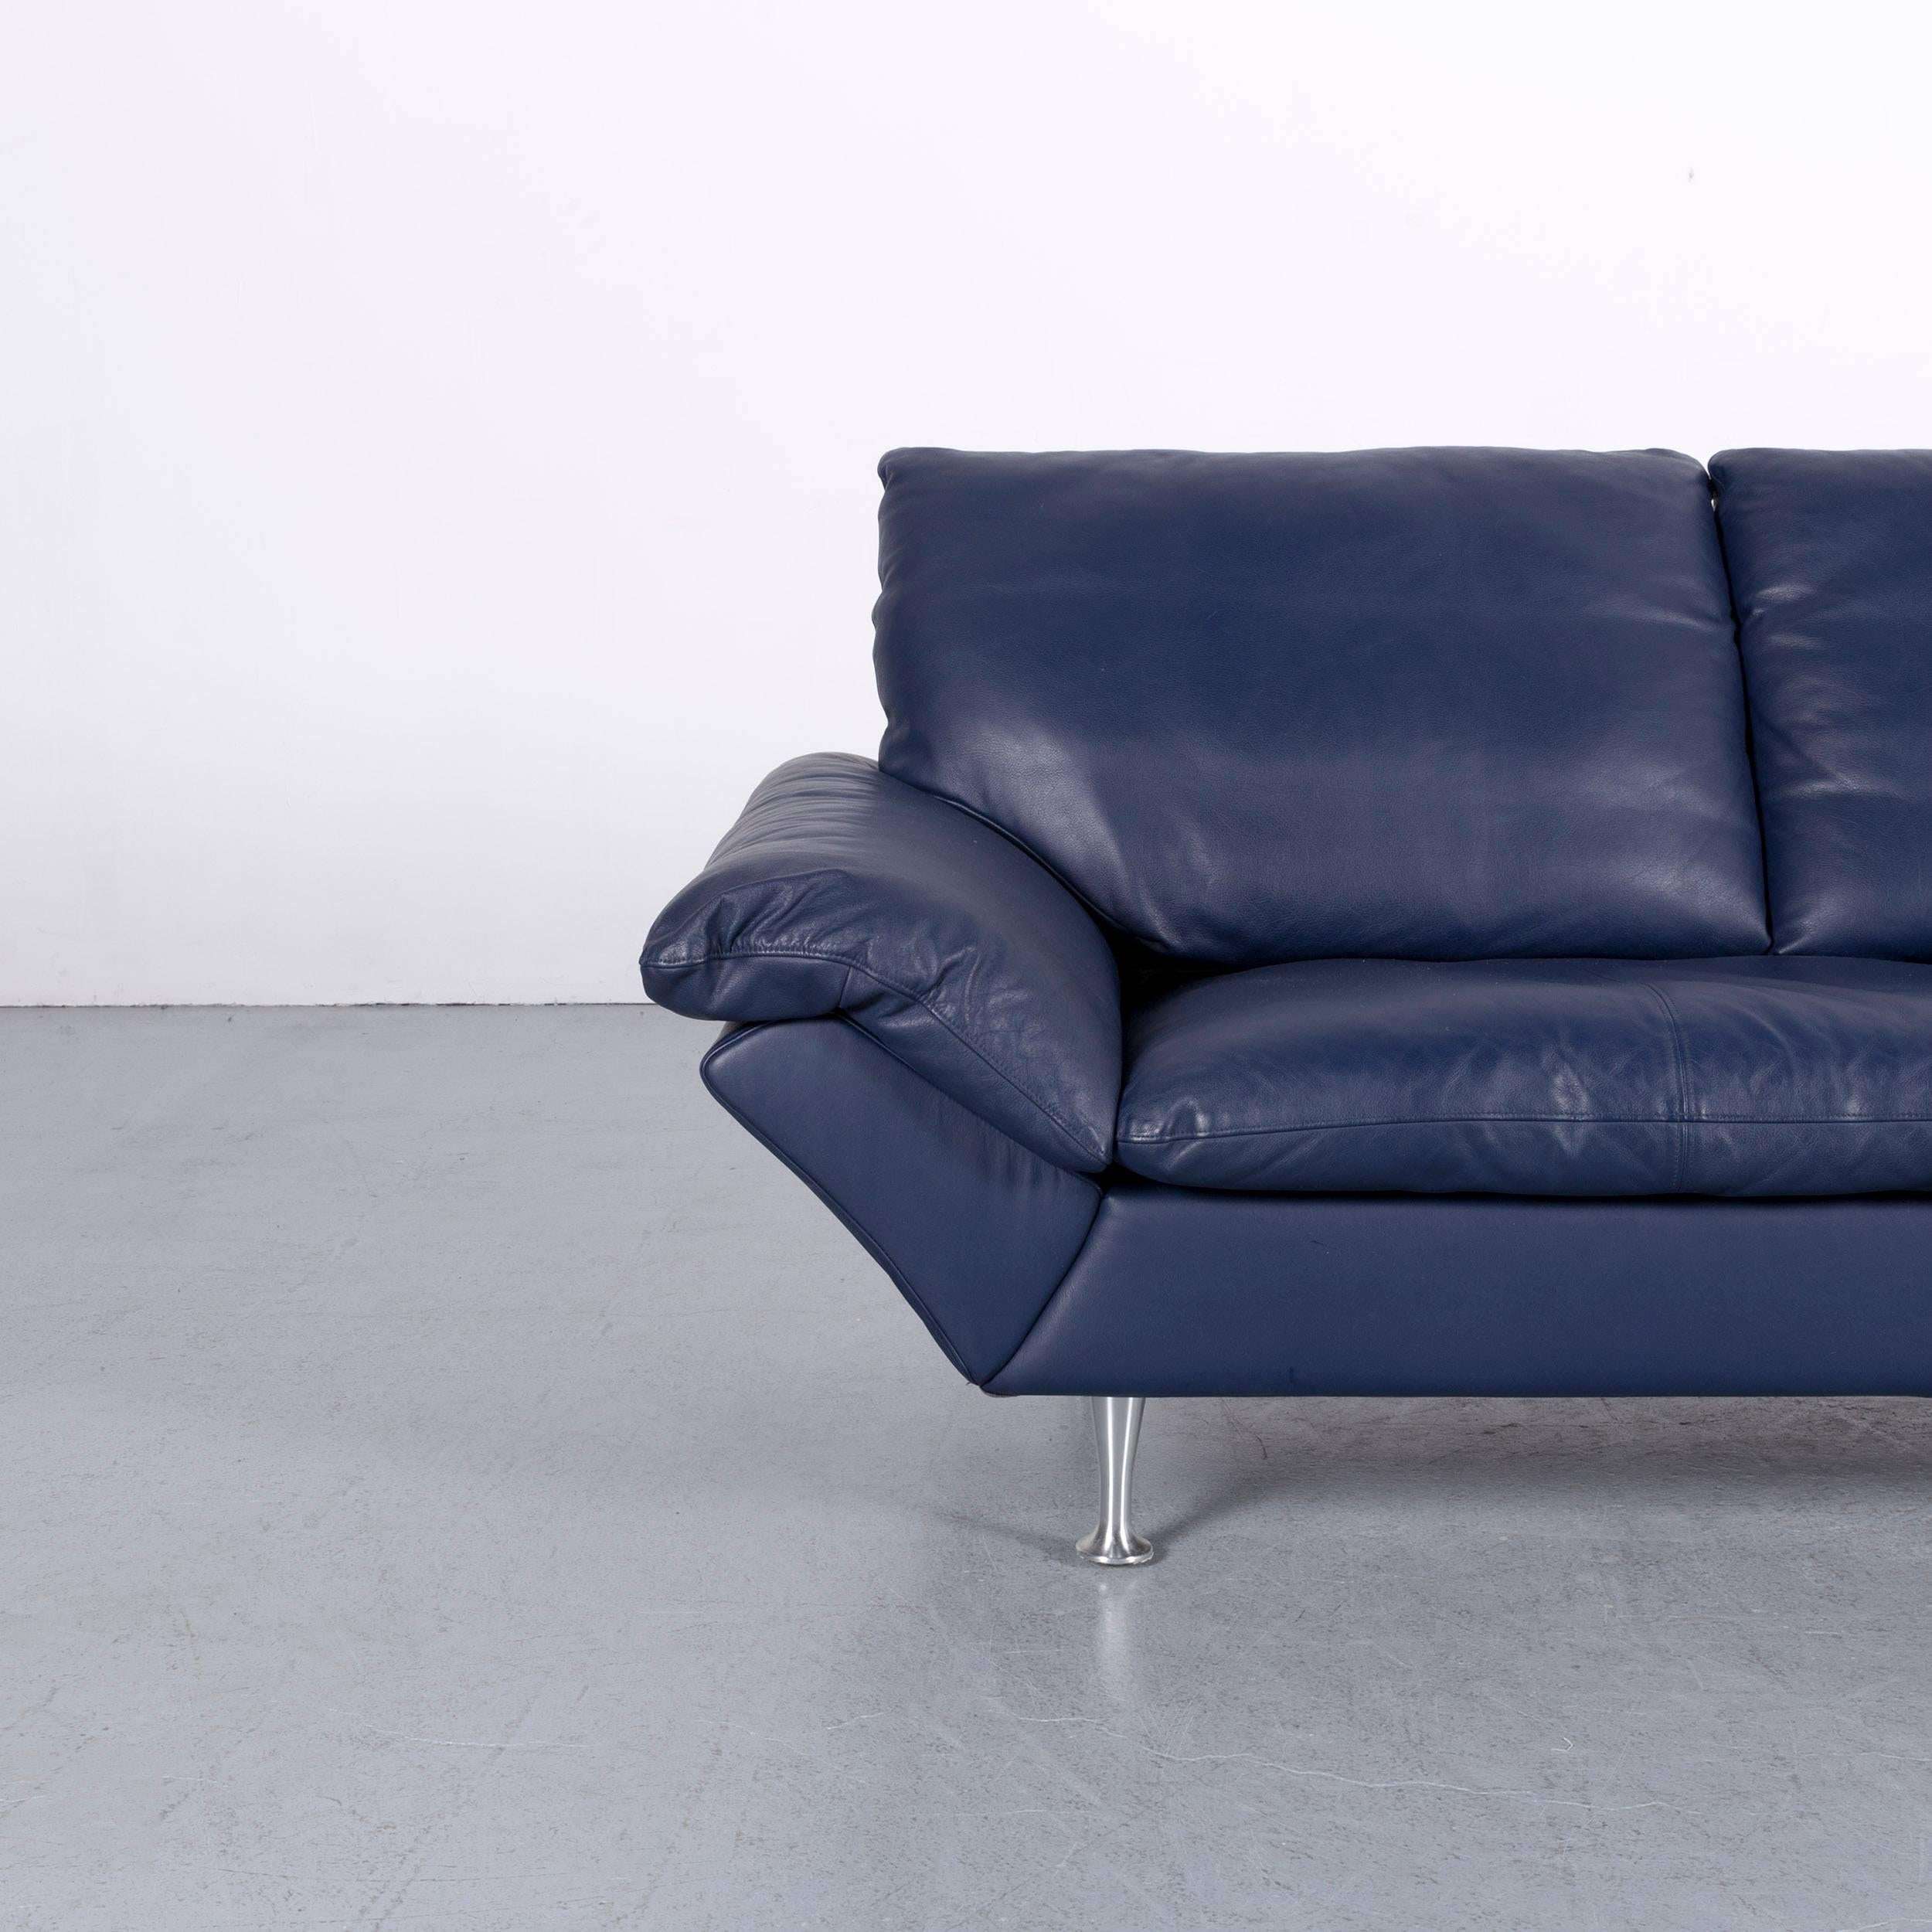 We bring to you an Rolf Benz designer sofa leather blue two-seat couch.